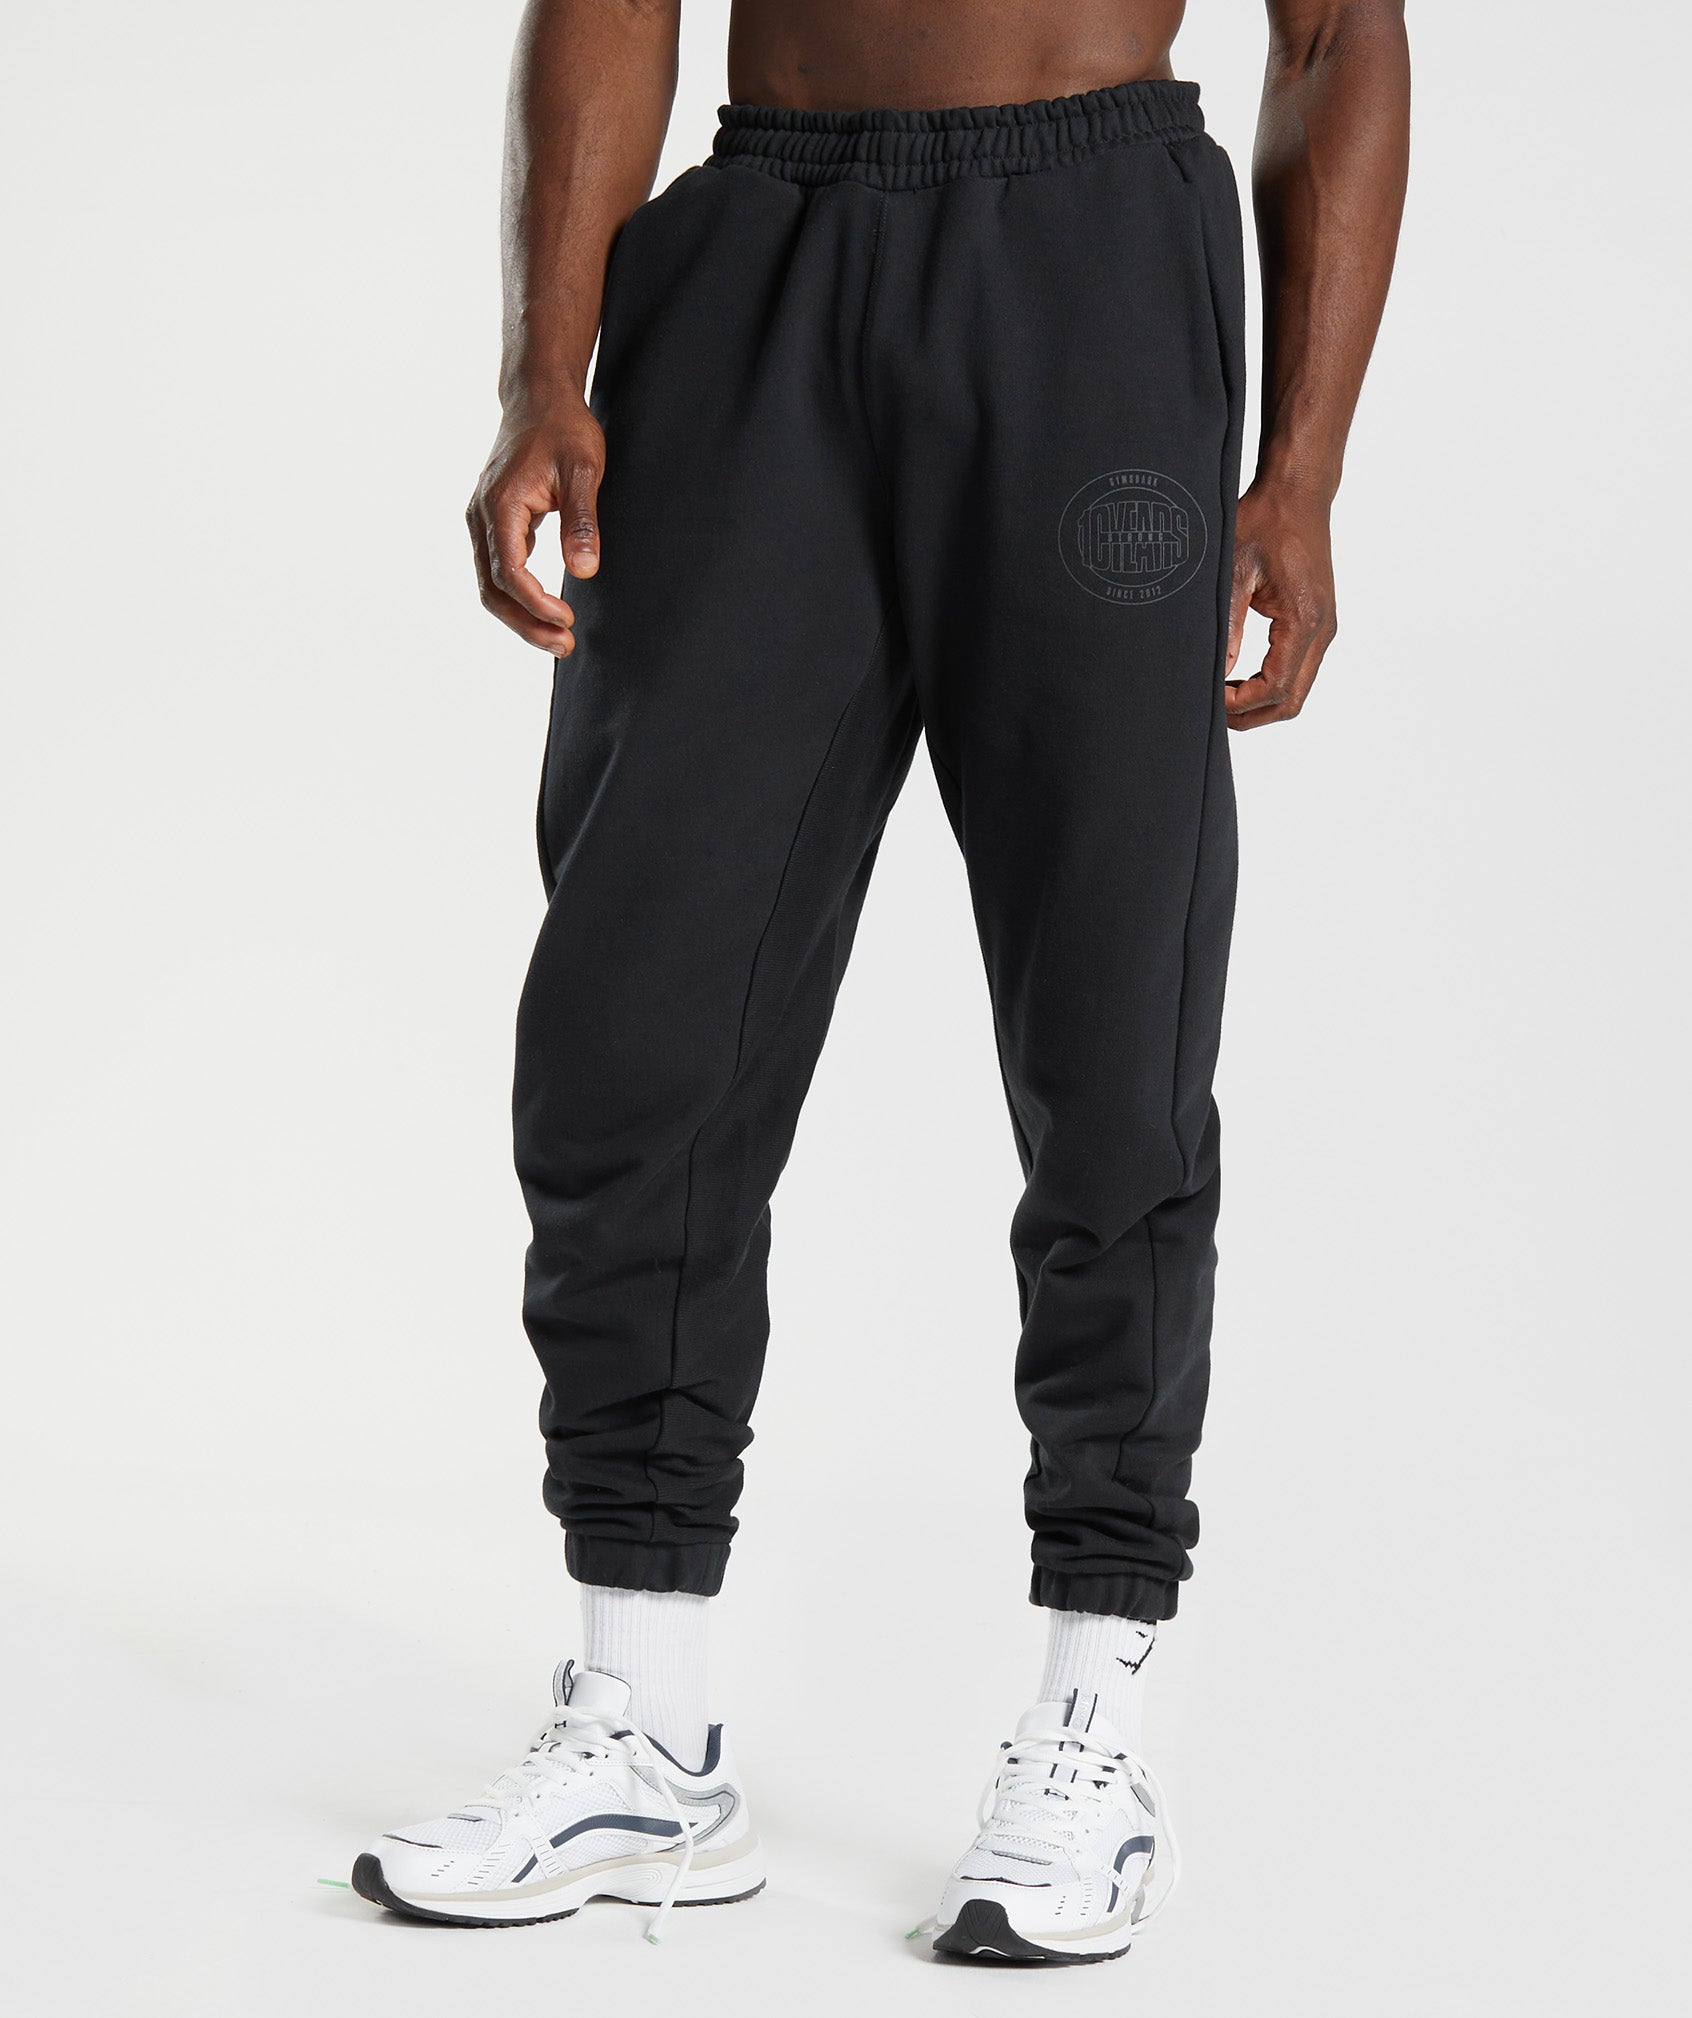 GS10 Year Joggers in Black - view 1